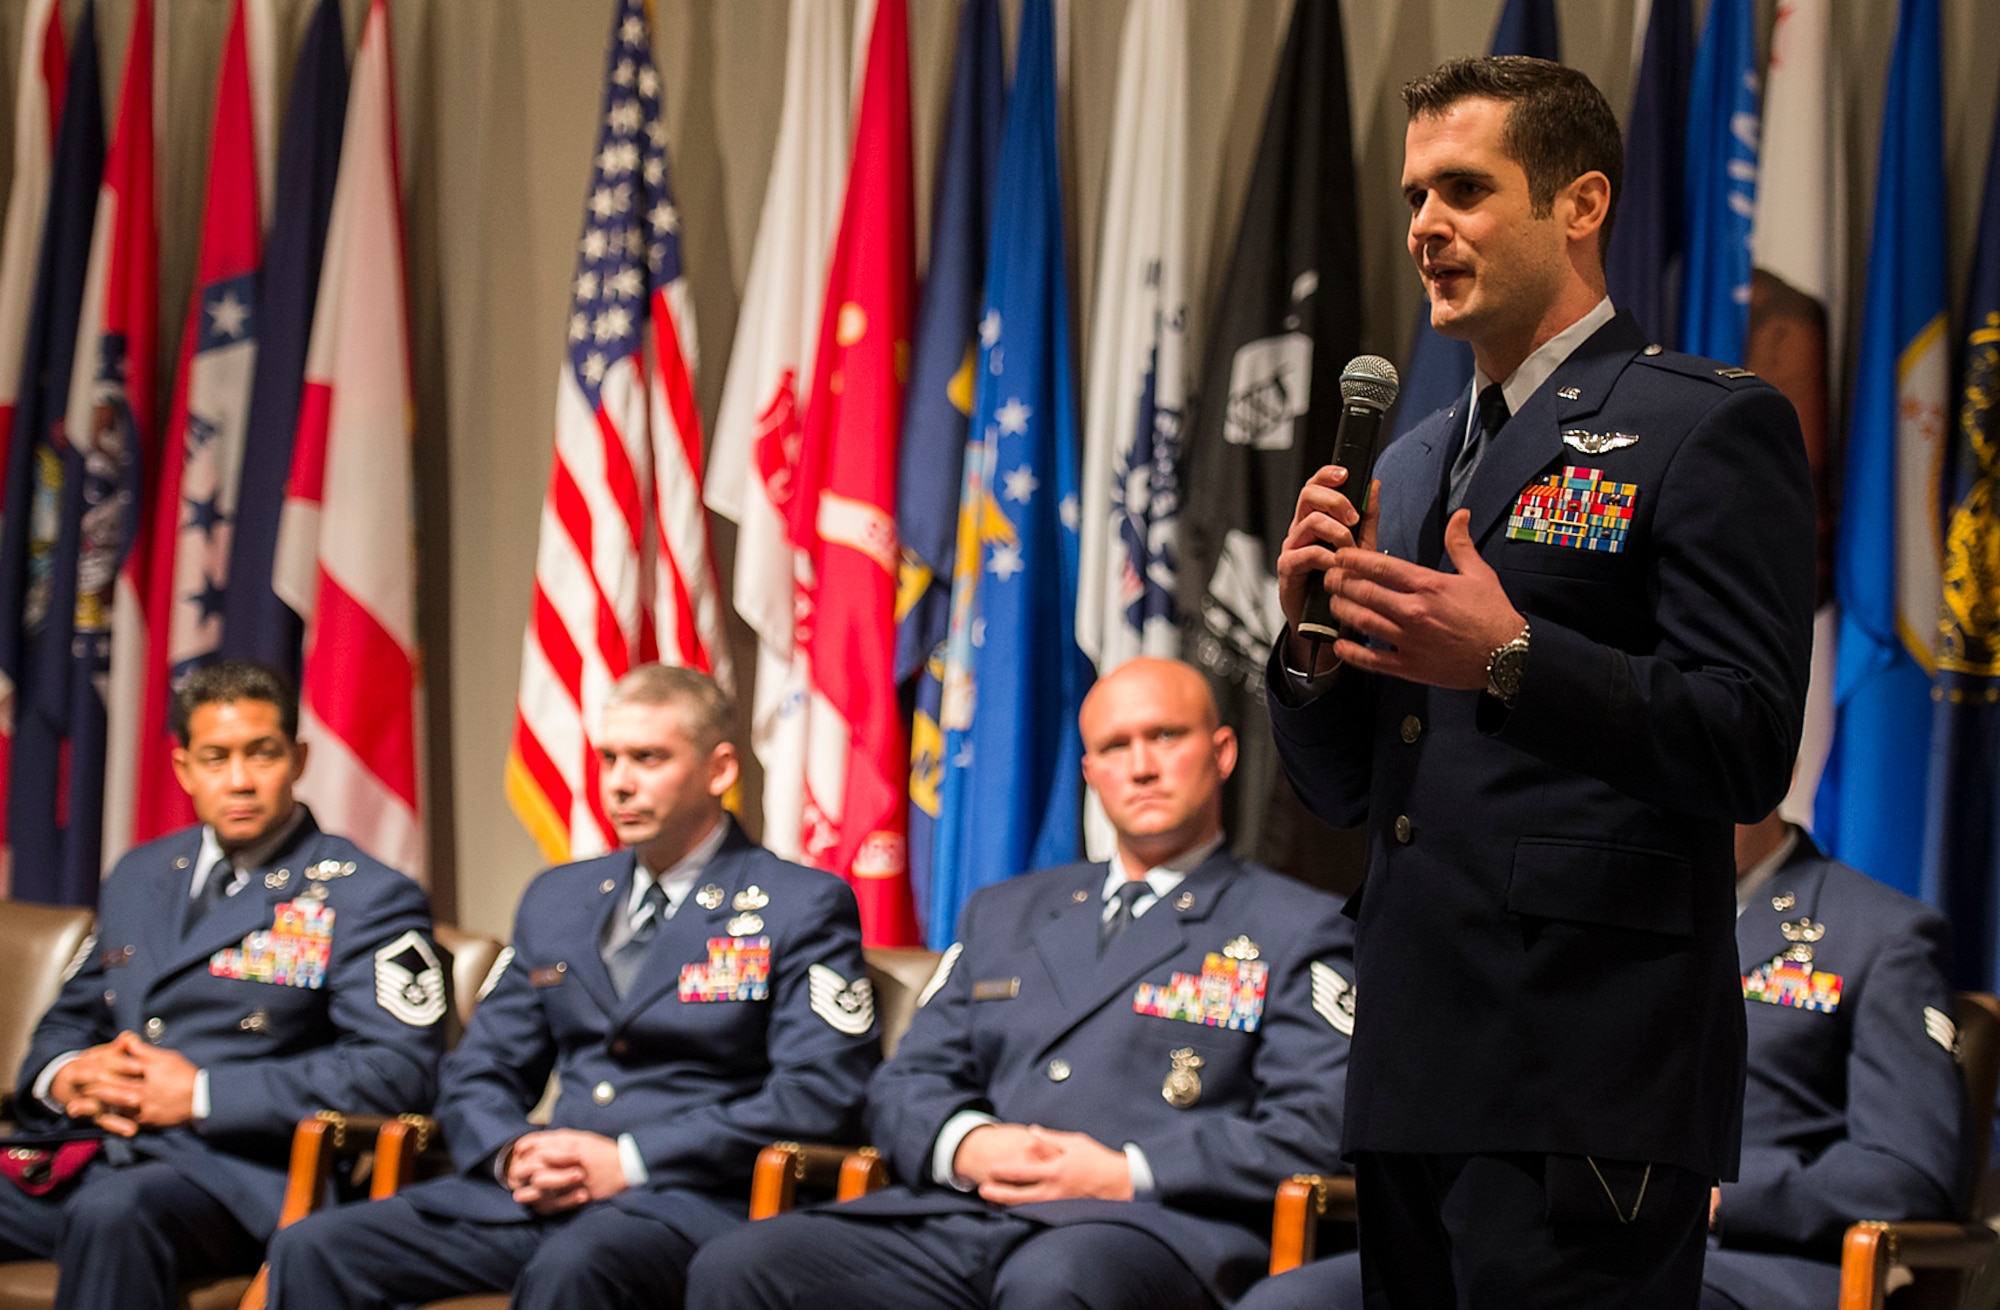 Air Force advisor Capt. Jeremy Powell, an honoree from the Air Force's ninth volume of Portraits in Courage, tells his story to a group of Air Force civic leaders from around the country, during a luncheon Feb. 4, 2015, Arlington, Va. Portraits in courage is an Air Force program highlighting Airmen for their honor, valor, devotion and selfless sacrifice in the face of extreme danger to themselves and others. (U.S. Air Force photo/Jim Varhegyi)